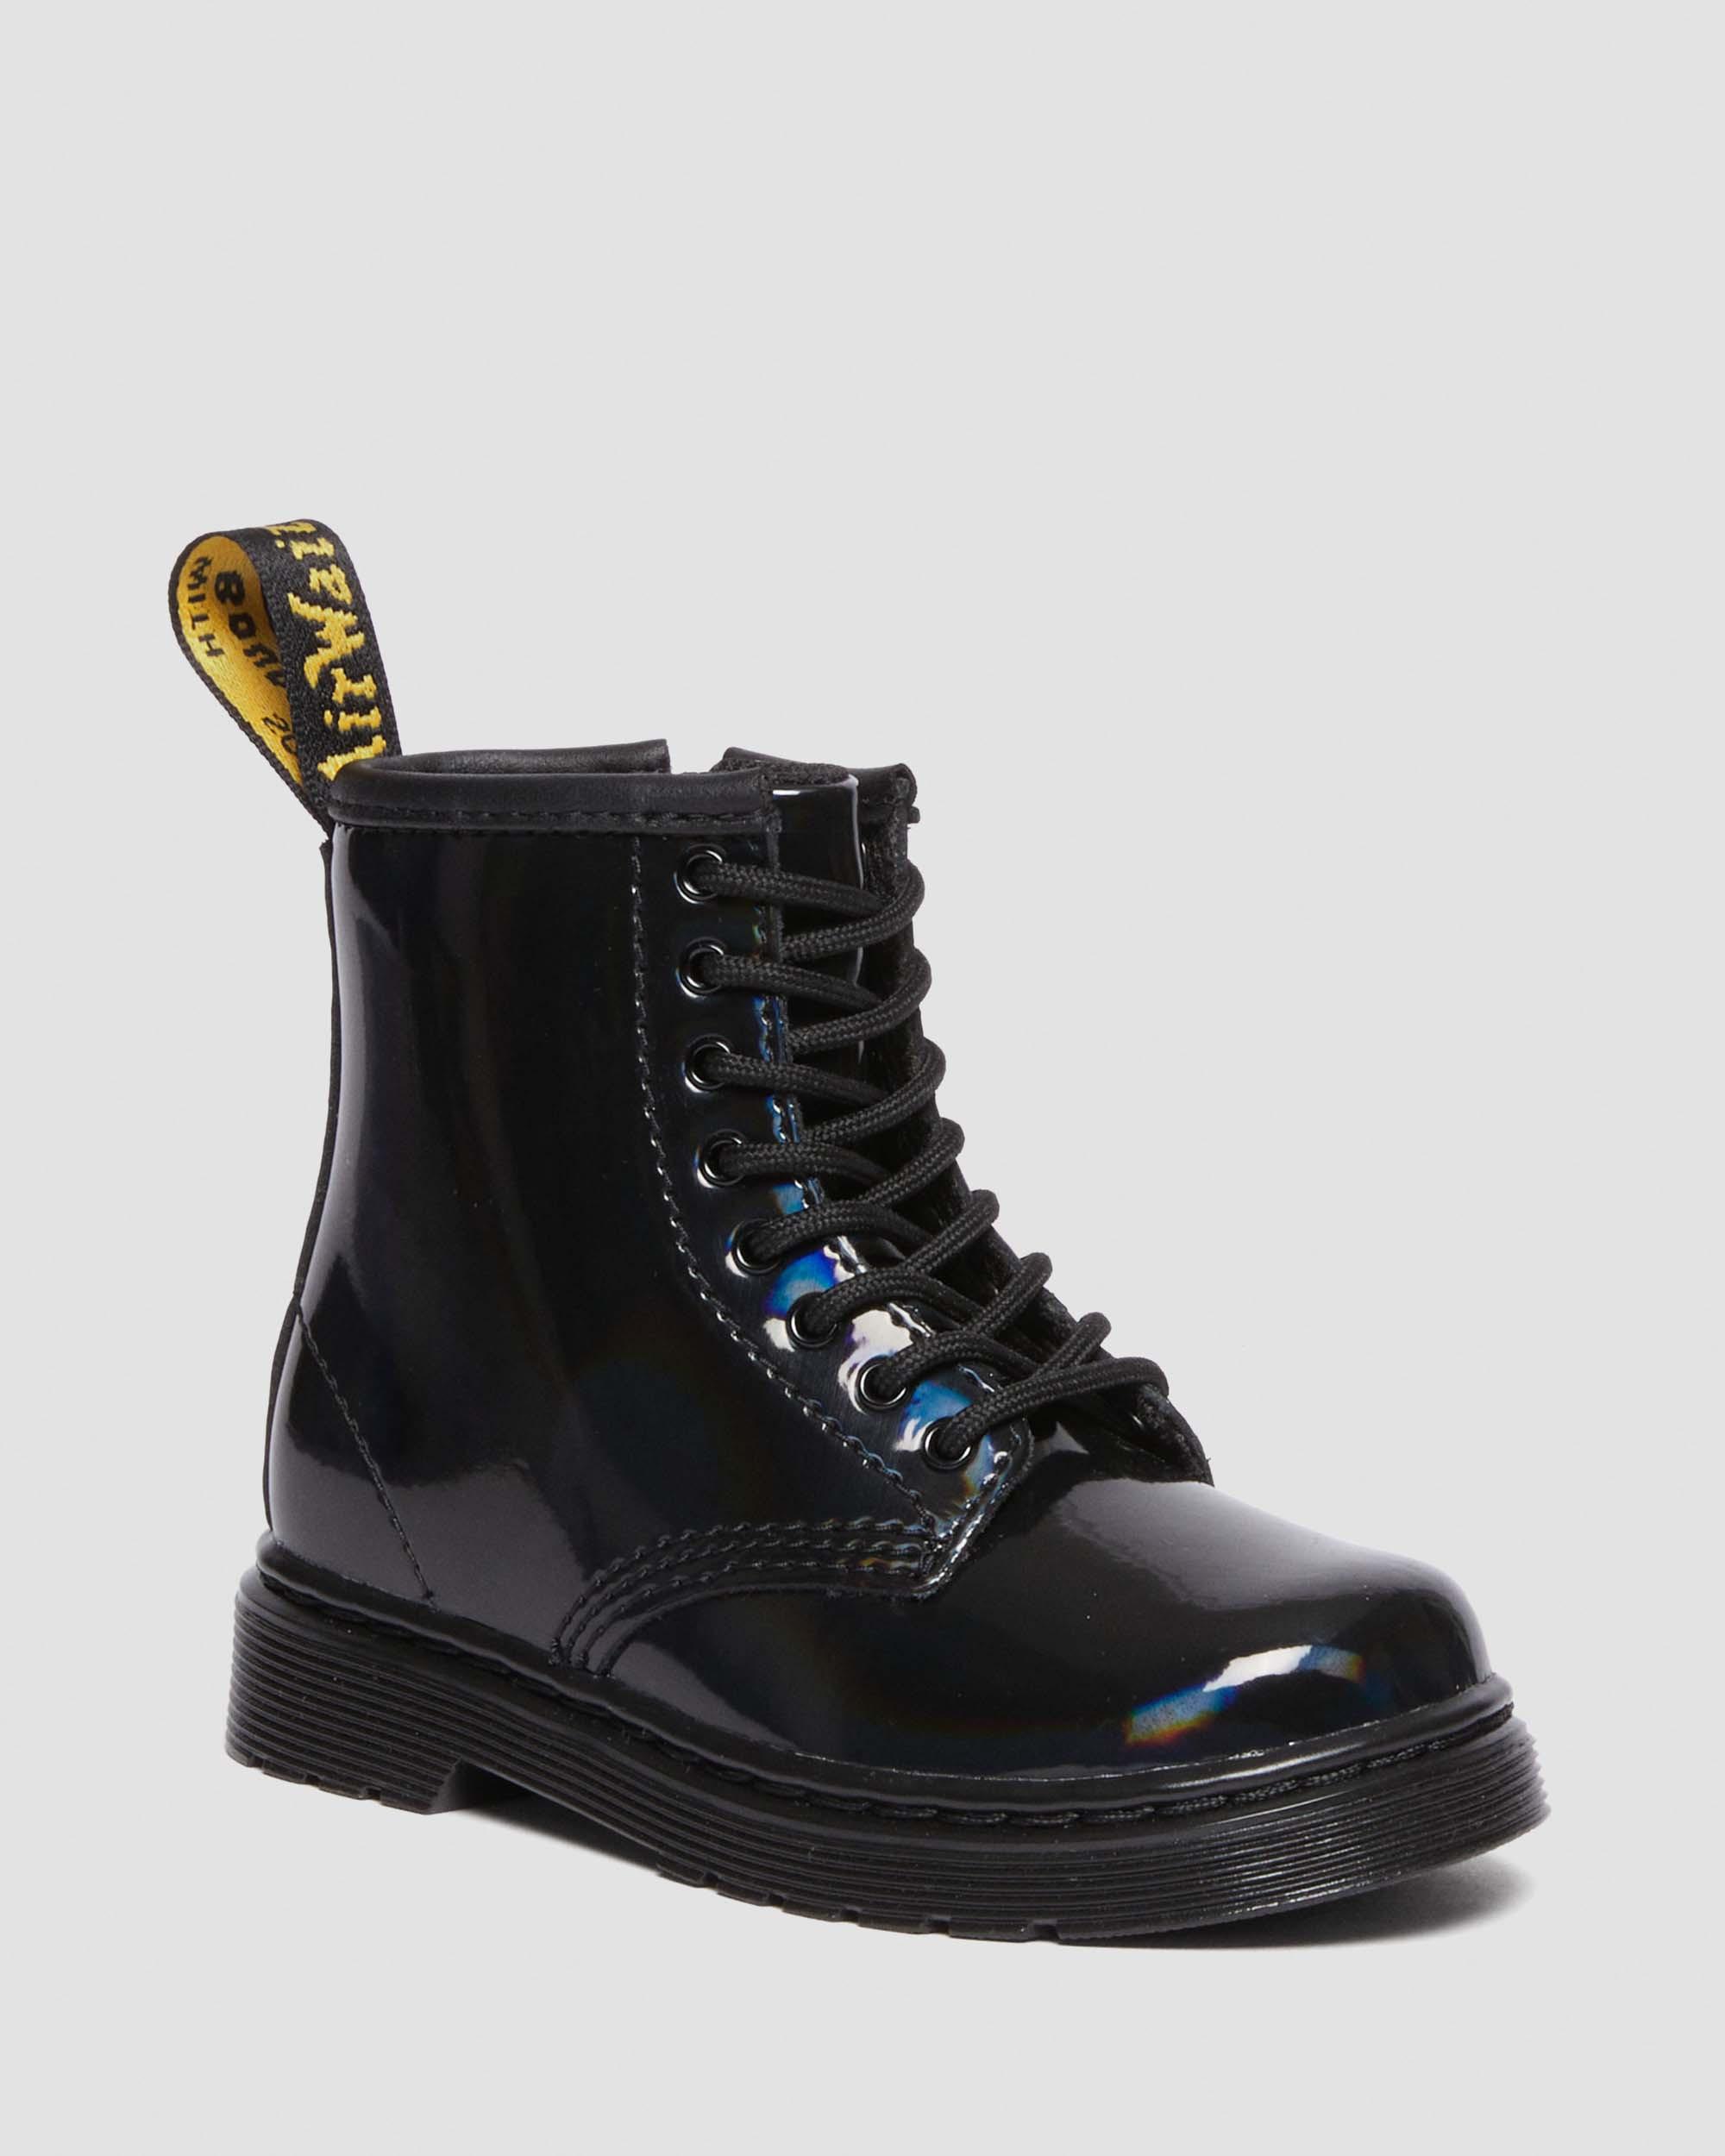 Dr. Martens' Babies' Toddler 1460 Rainbow Patent Leather Lace Up Boots In Schwarz/mehrfarbig